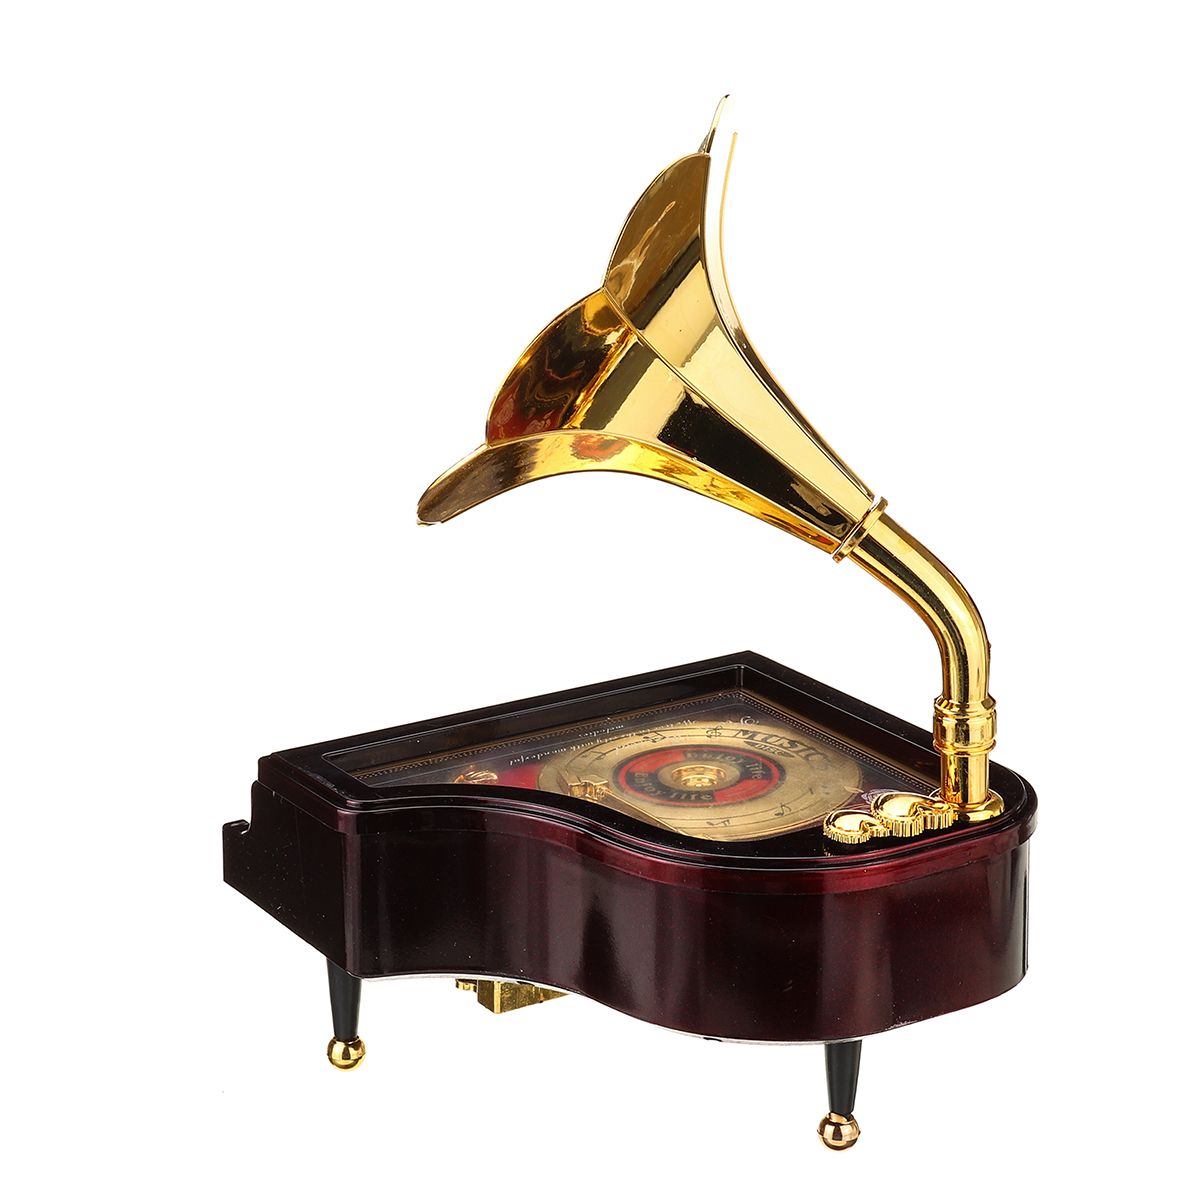 Vintage-Retro-Piano-Phonograph-Gold-Trumpet-Horn-Music-Box-Home-Decorations-1619763